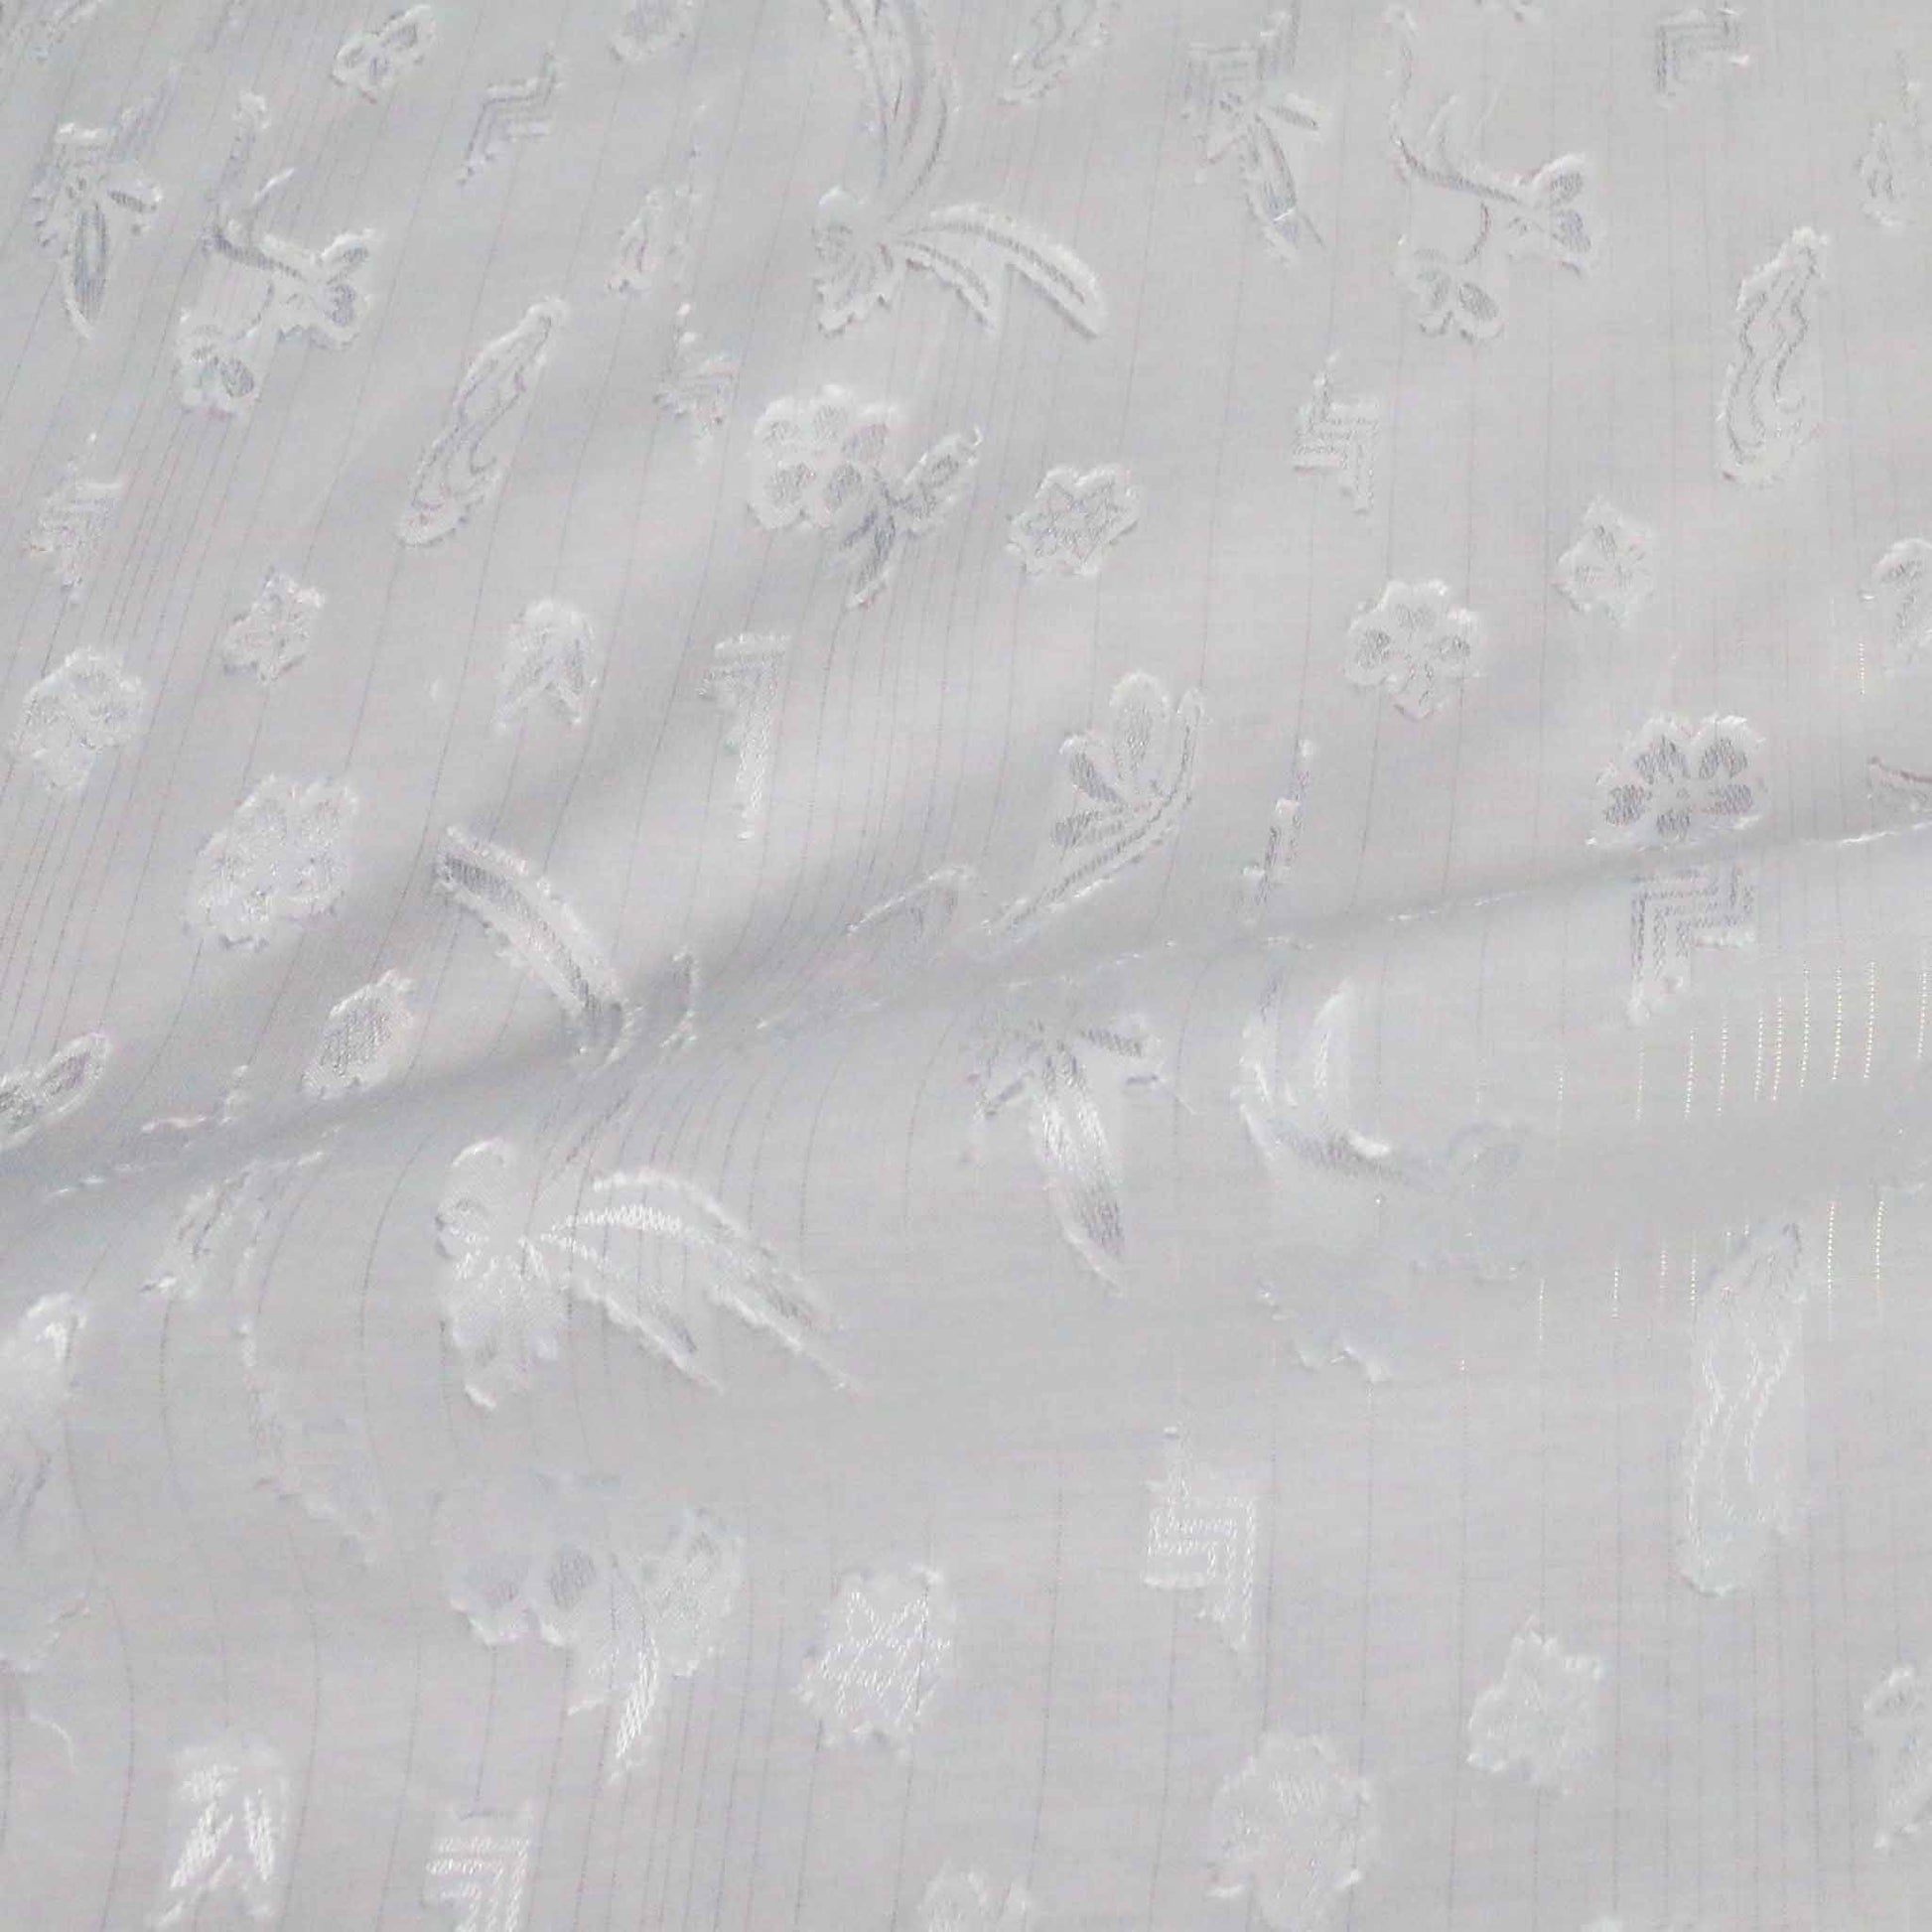 flocked and clipped floral design on white polycotton dressmaking fabric with silver stripe